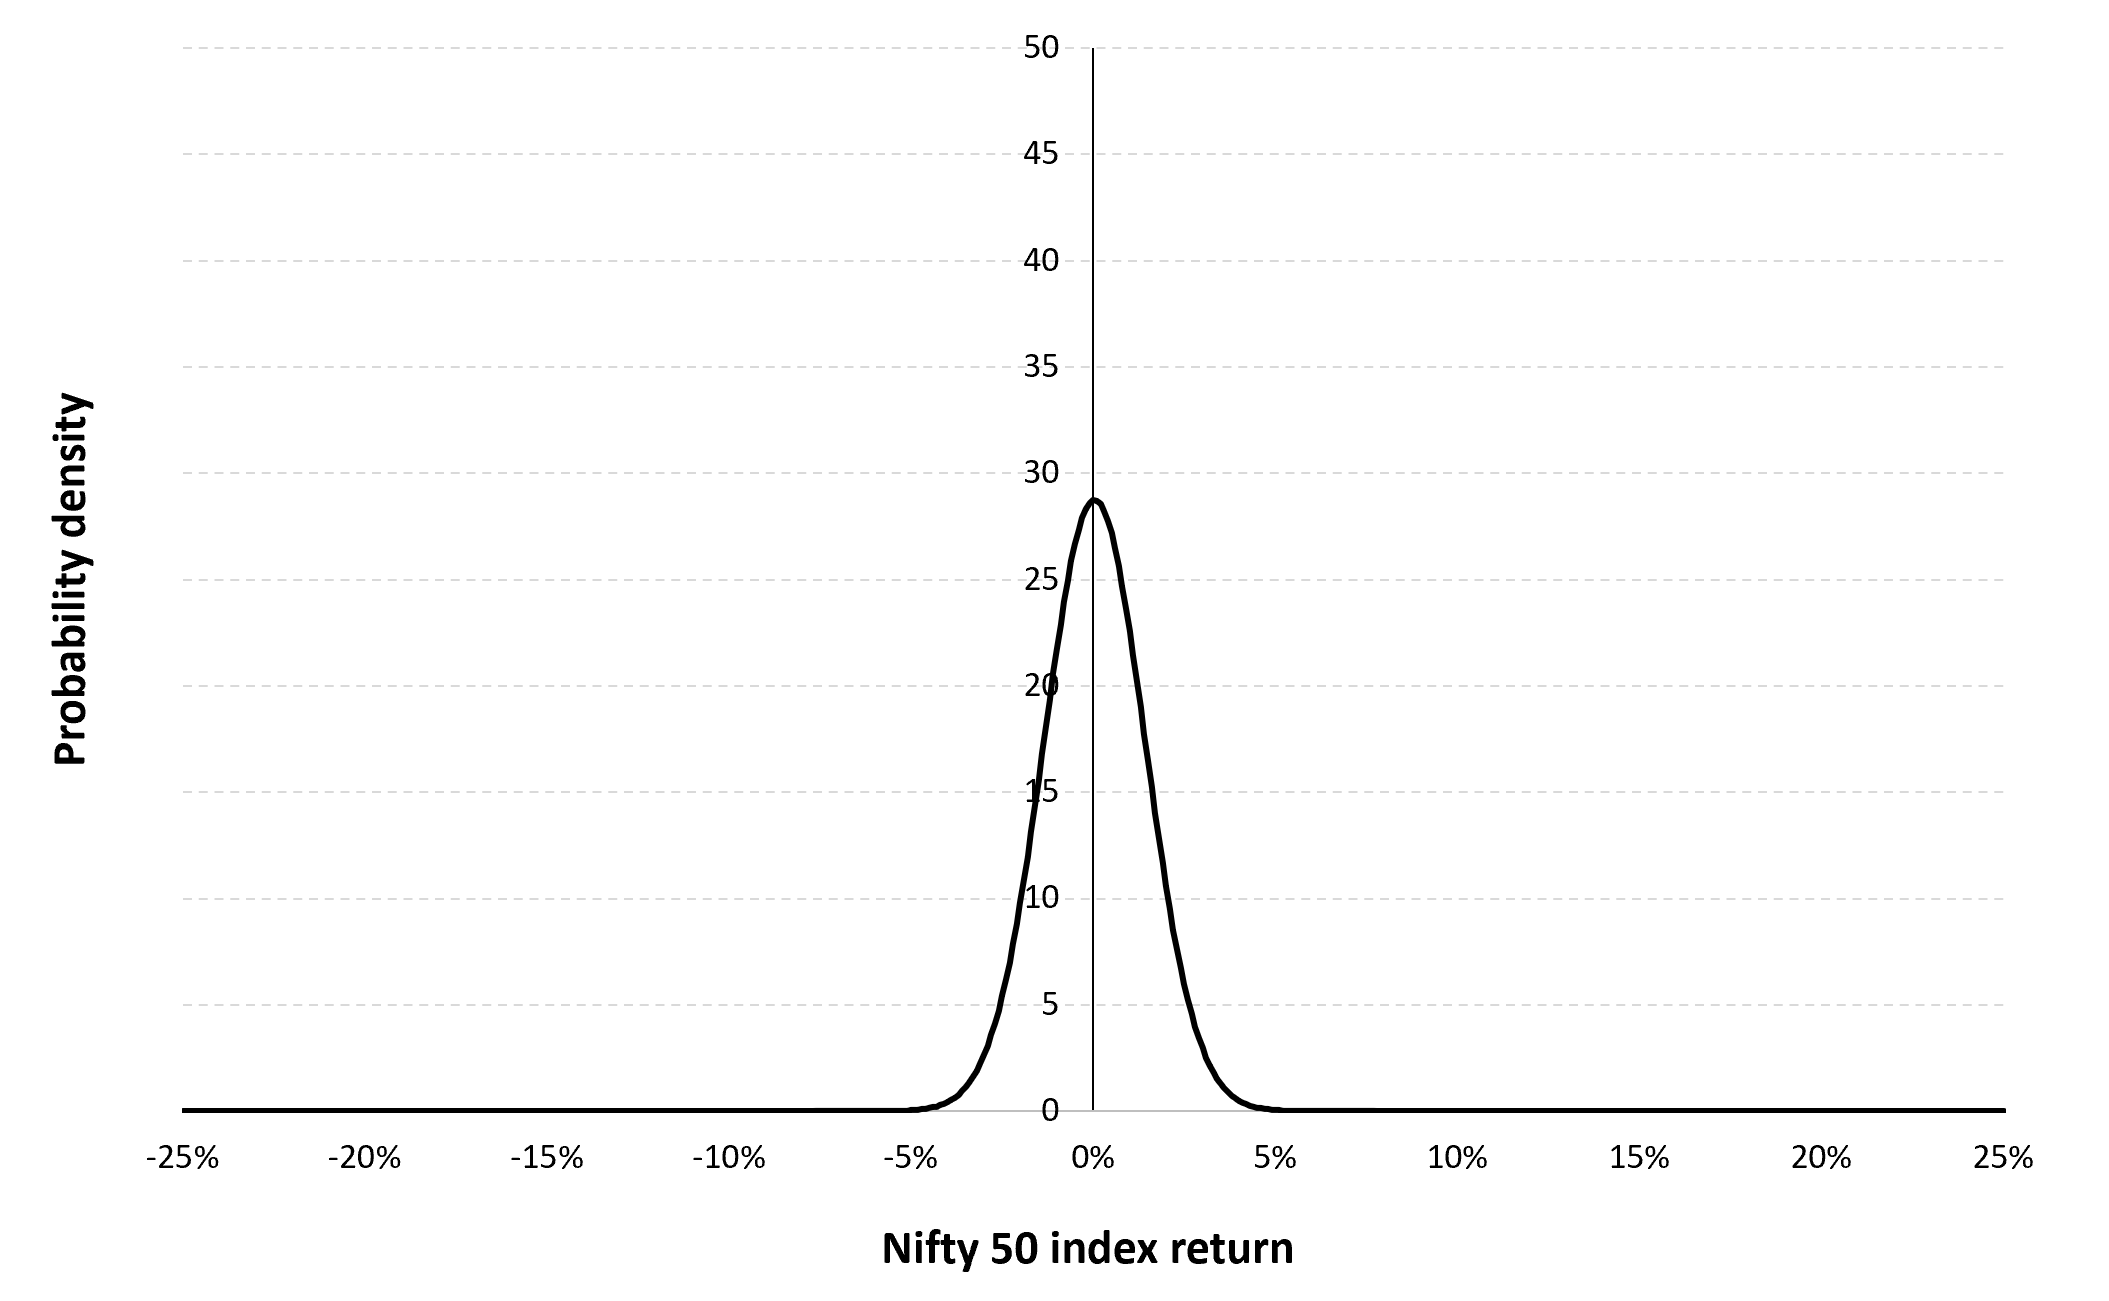 Gaussian distribution of the daily Nifty 50 index returns